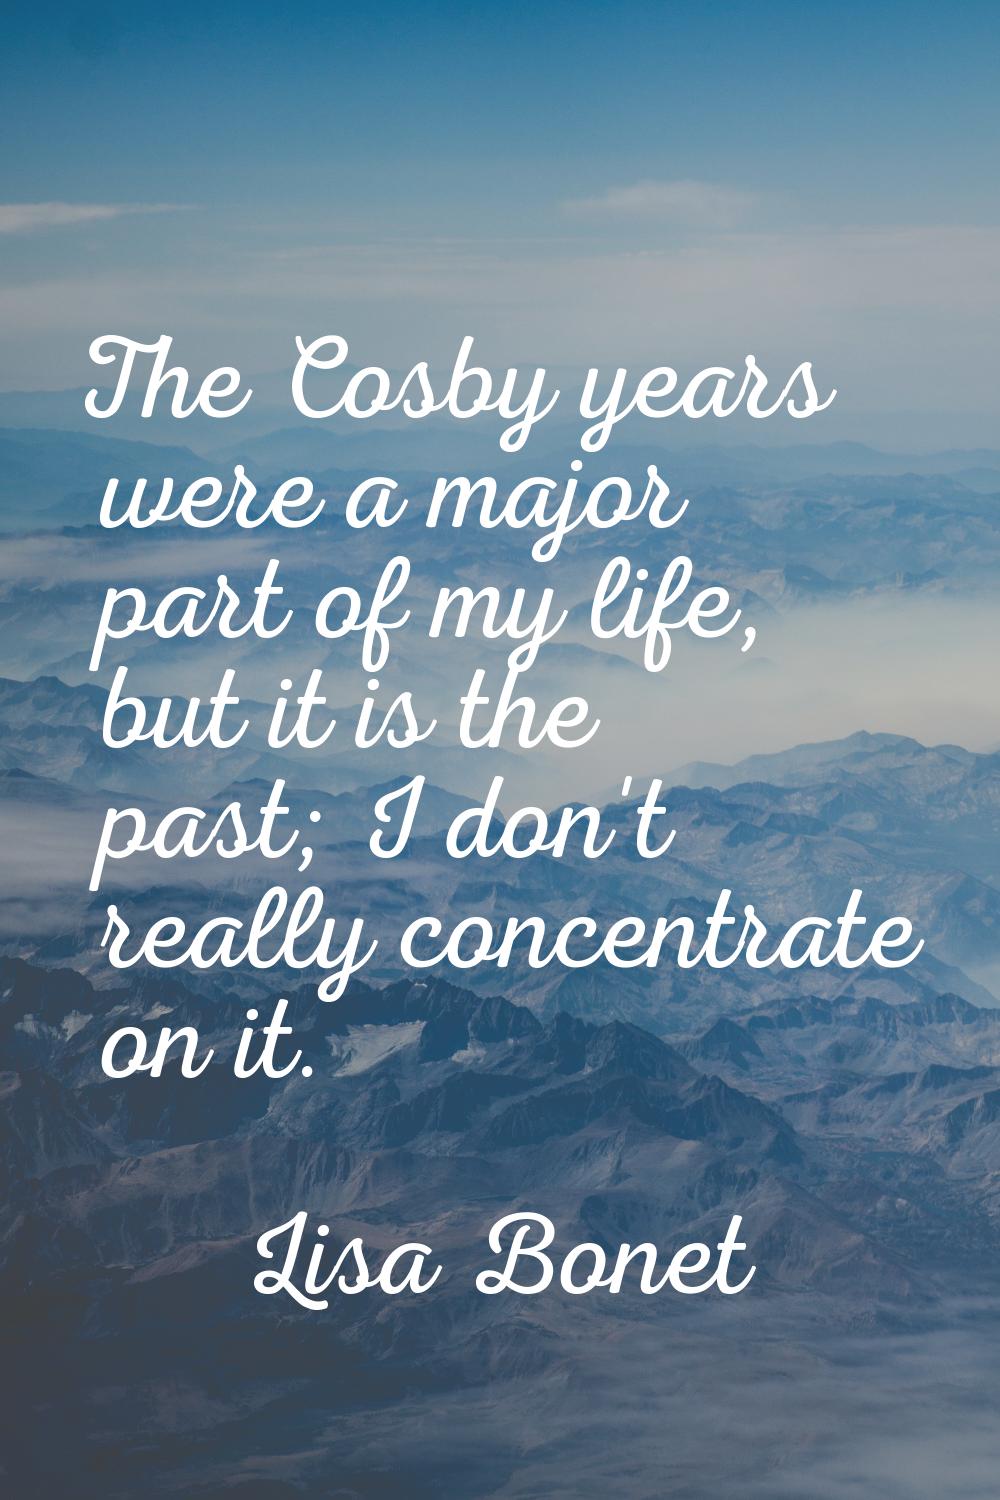 The Cosby years were a major part of my life, but it is the past; I don't really concentrate on it.